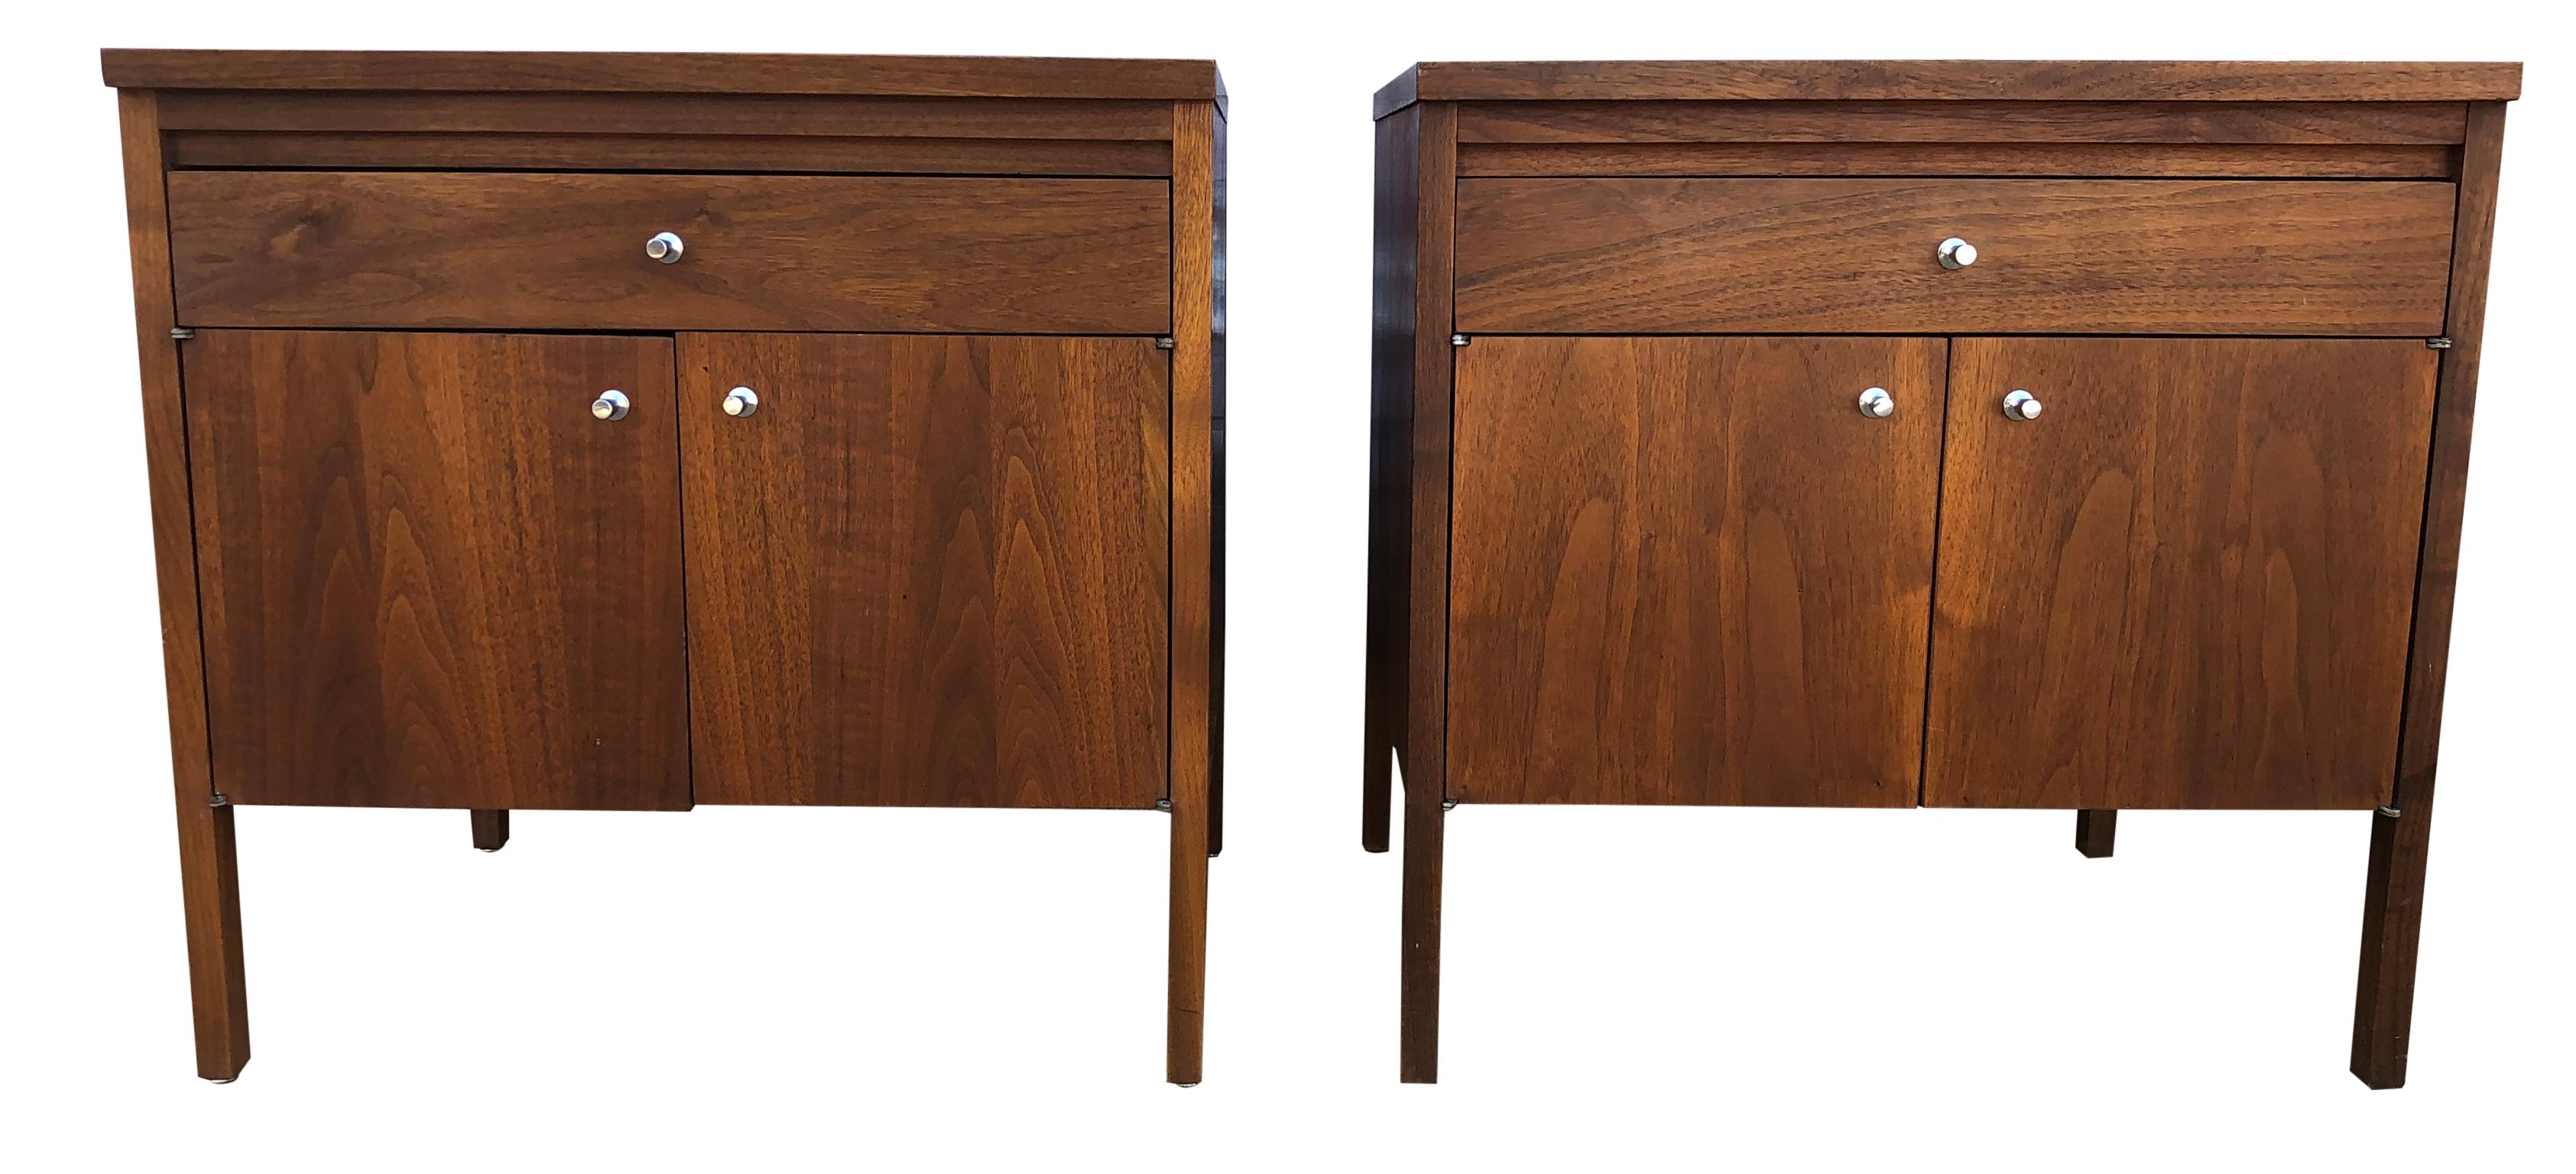 Midcentury American Designer Paul McCobb pair of nightstands small cabinets solid walnut. Original finish in beautiful vintage condition - Has (1) top drawer and (2) lower front cabinet doors - All solid Walnut with joint and grain details - Solid